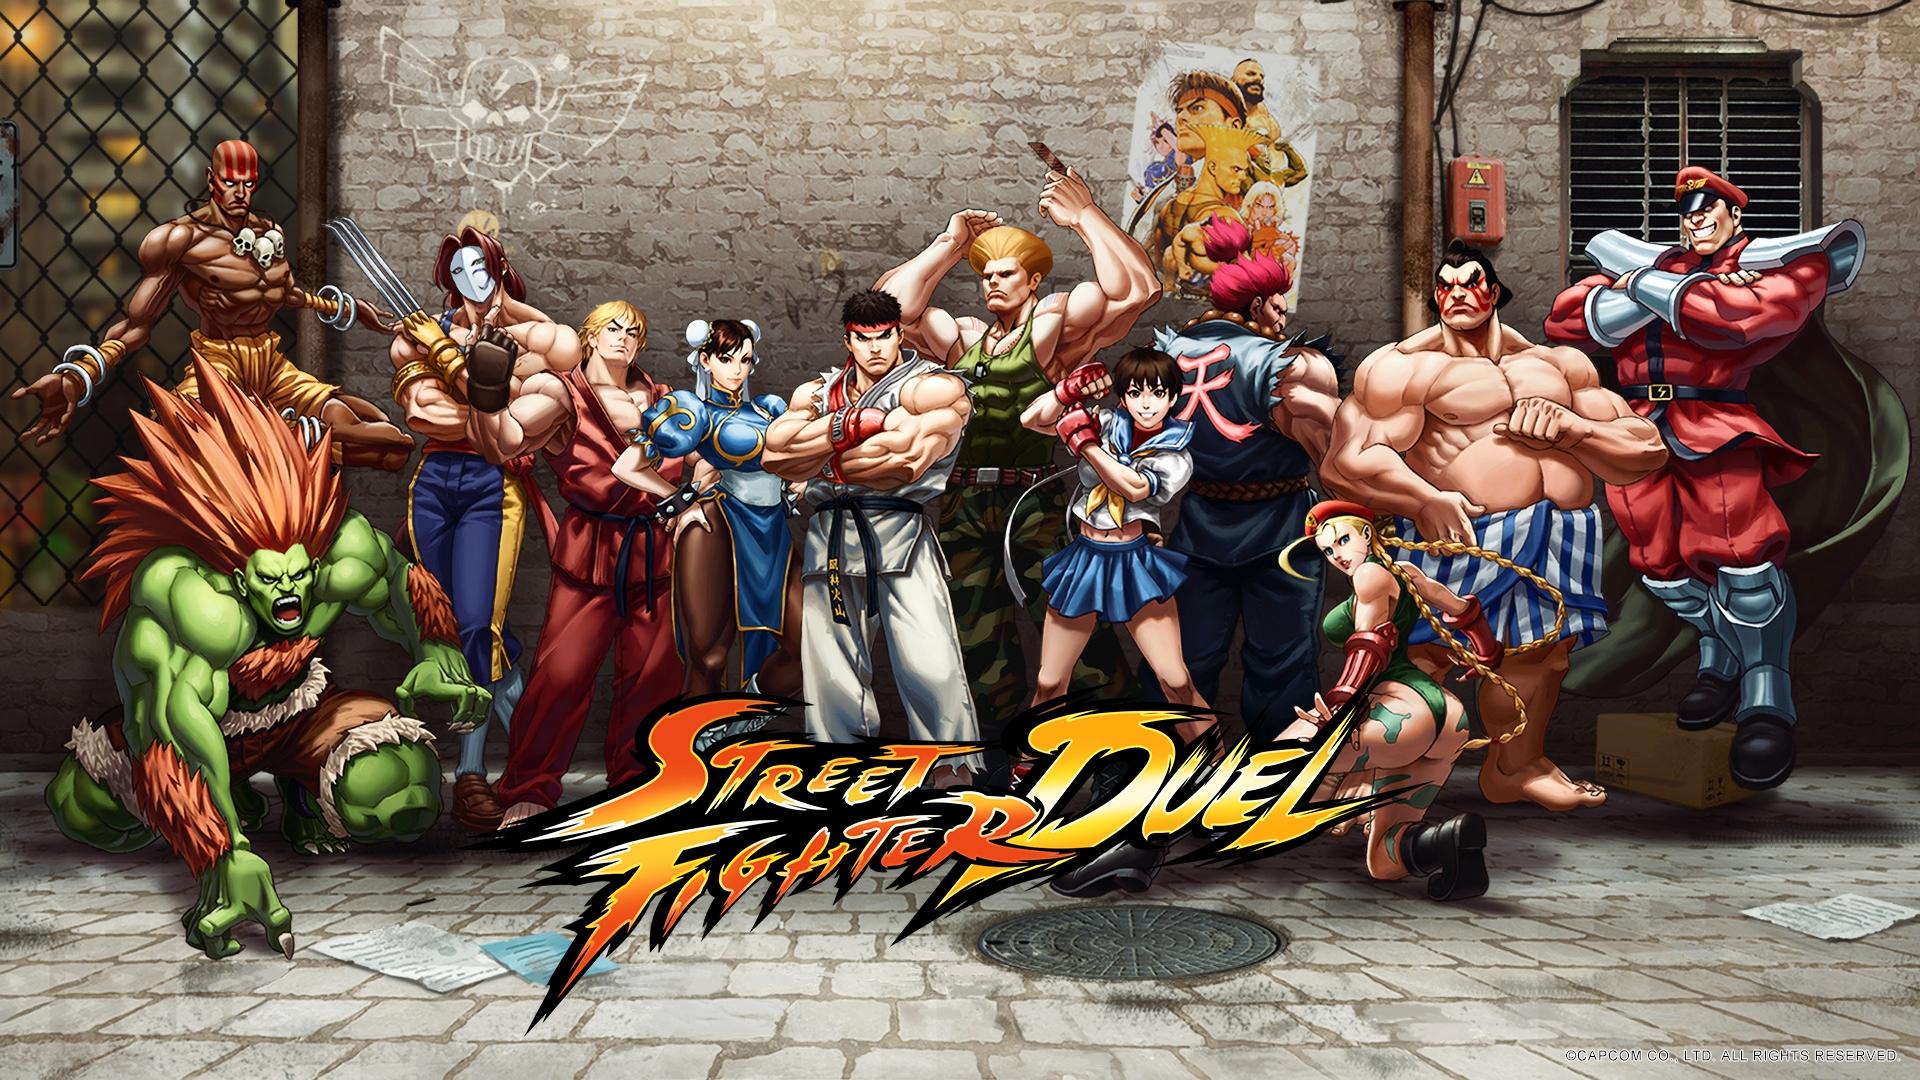 Street Fighter: Duel tier list and reroll guide